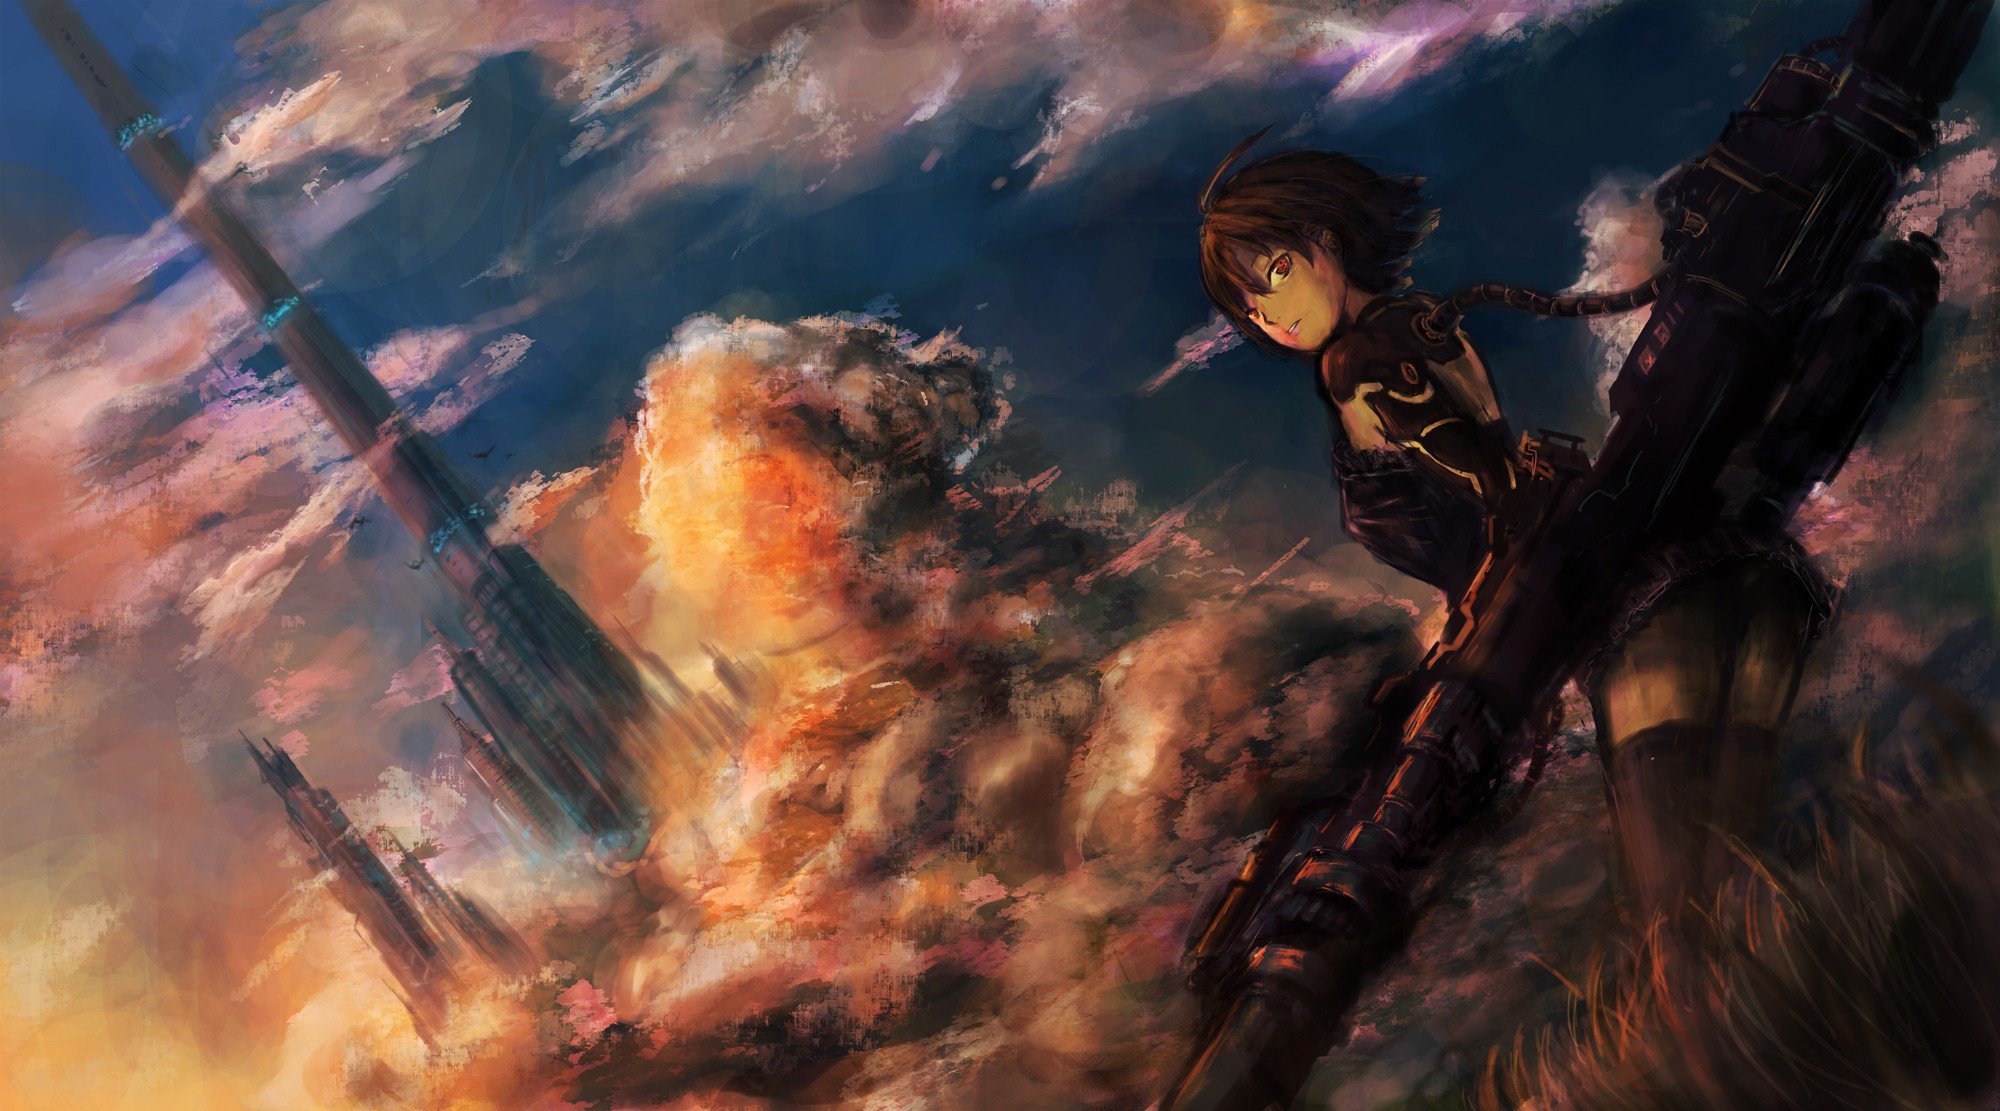 brunettes, Clouds, Cityscapes, Cyborgs, Weapons, Fantasy, Art, Red, Eyes Wallpaper